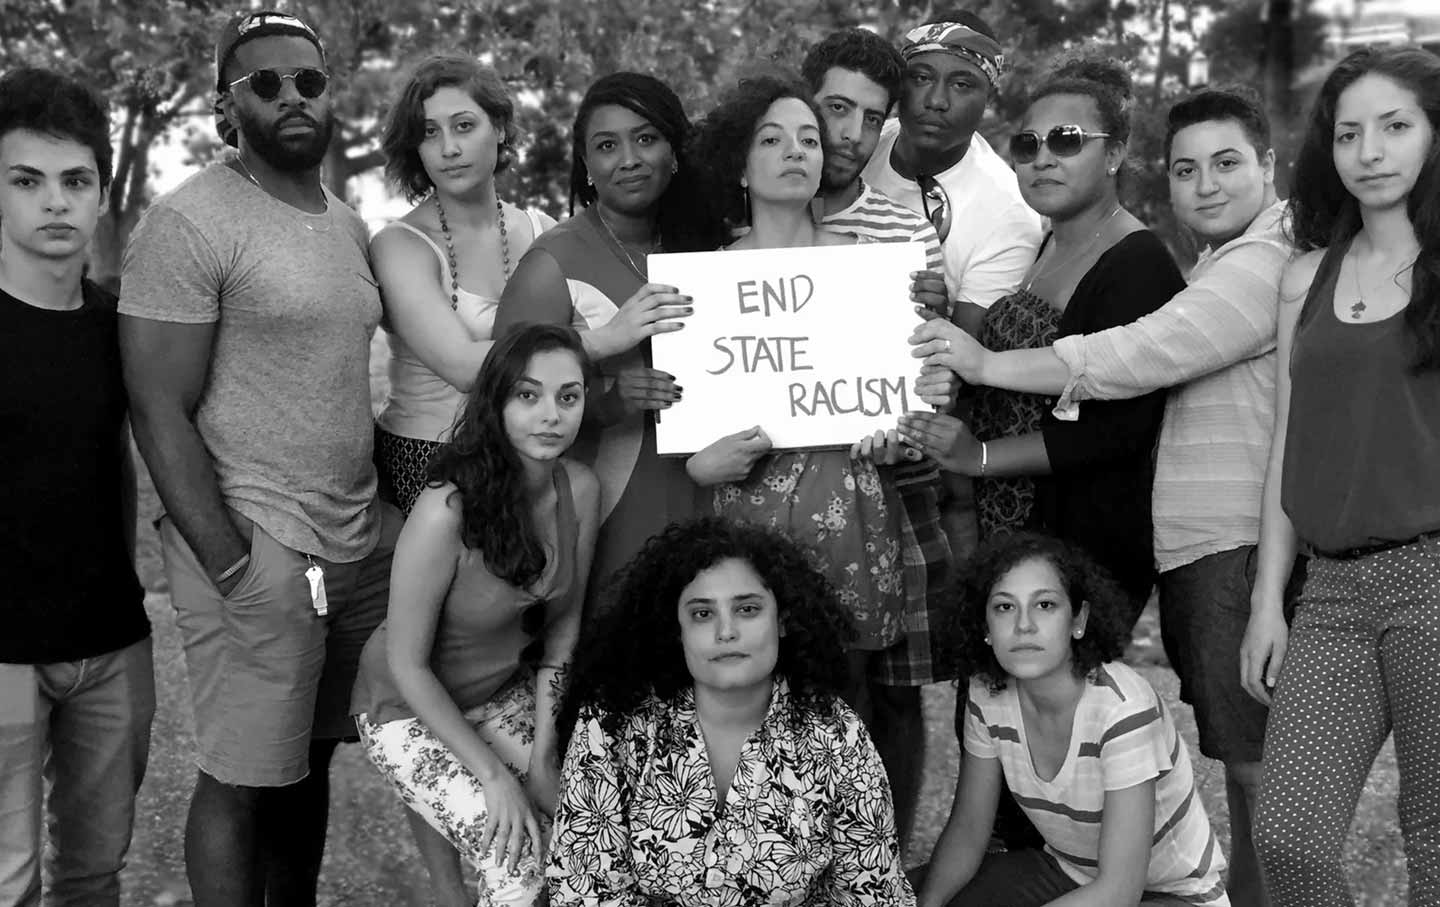 A group of Black and Palestinian organizers hold a sign saying end state racism.